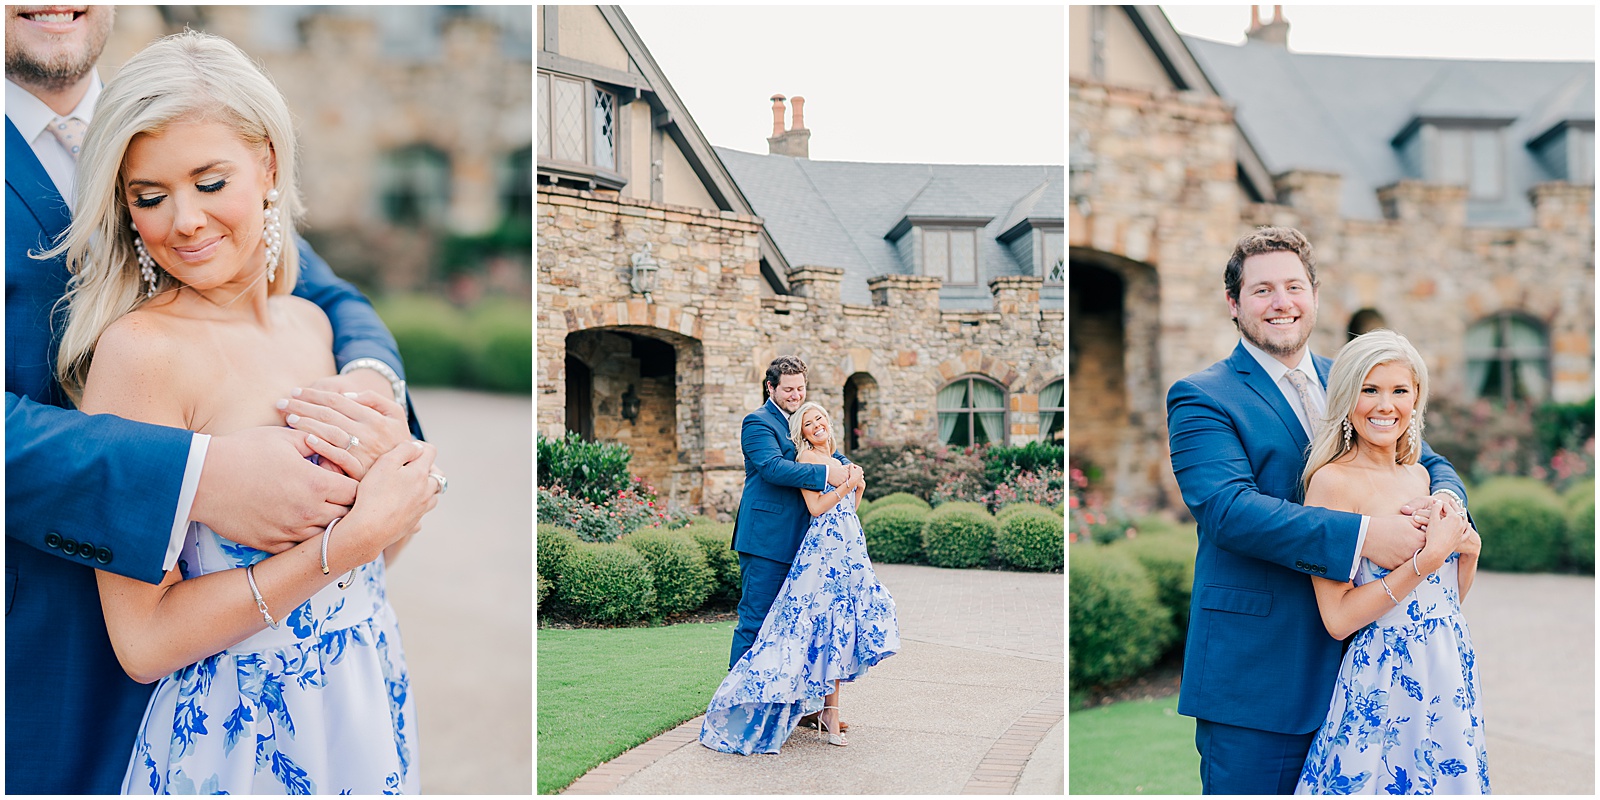 Huntsville Engagement Session at The Ledges Country Club